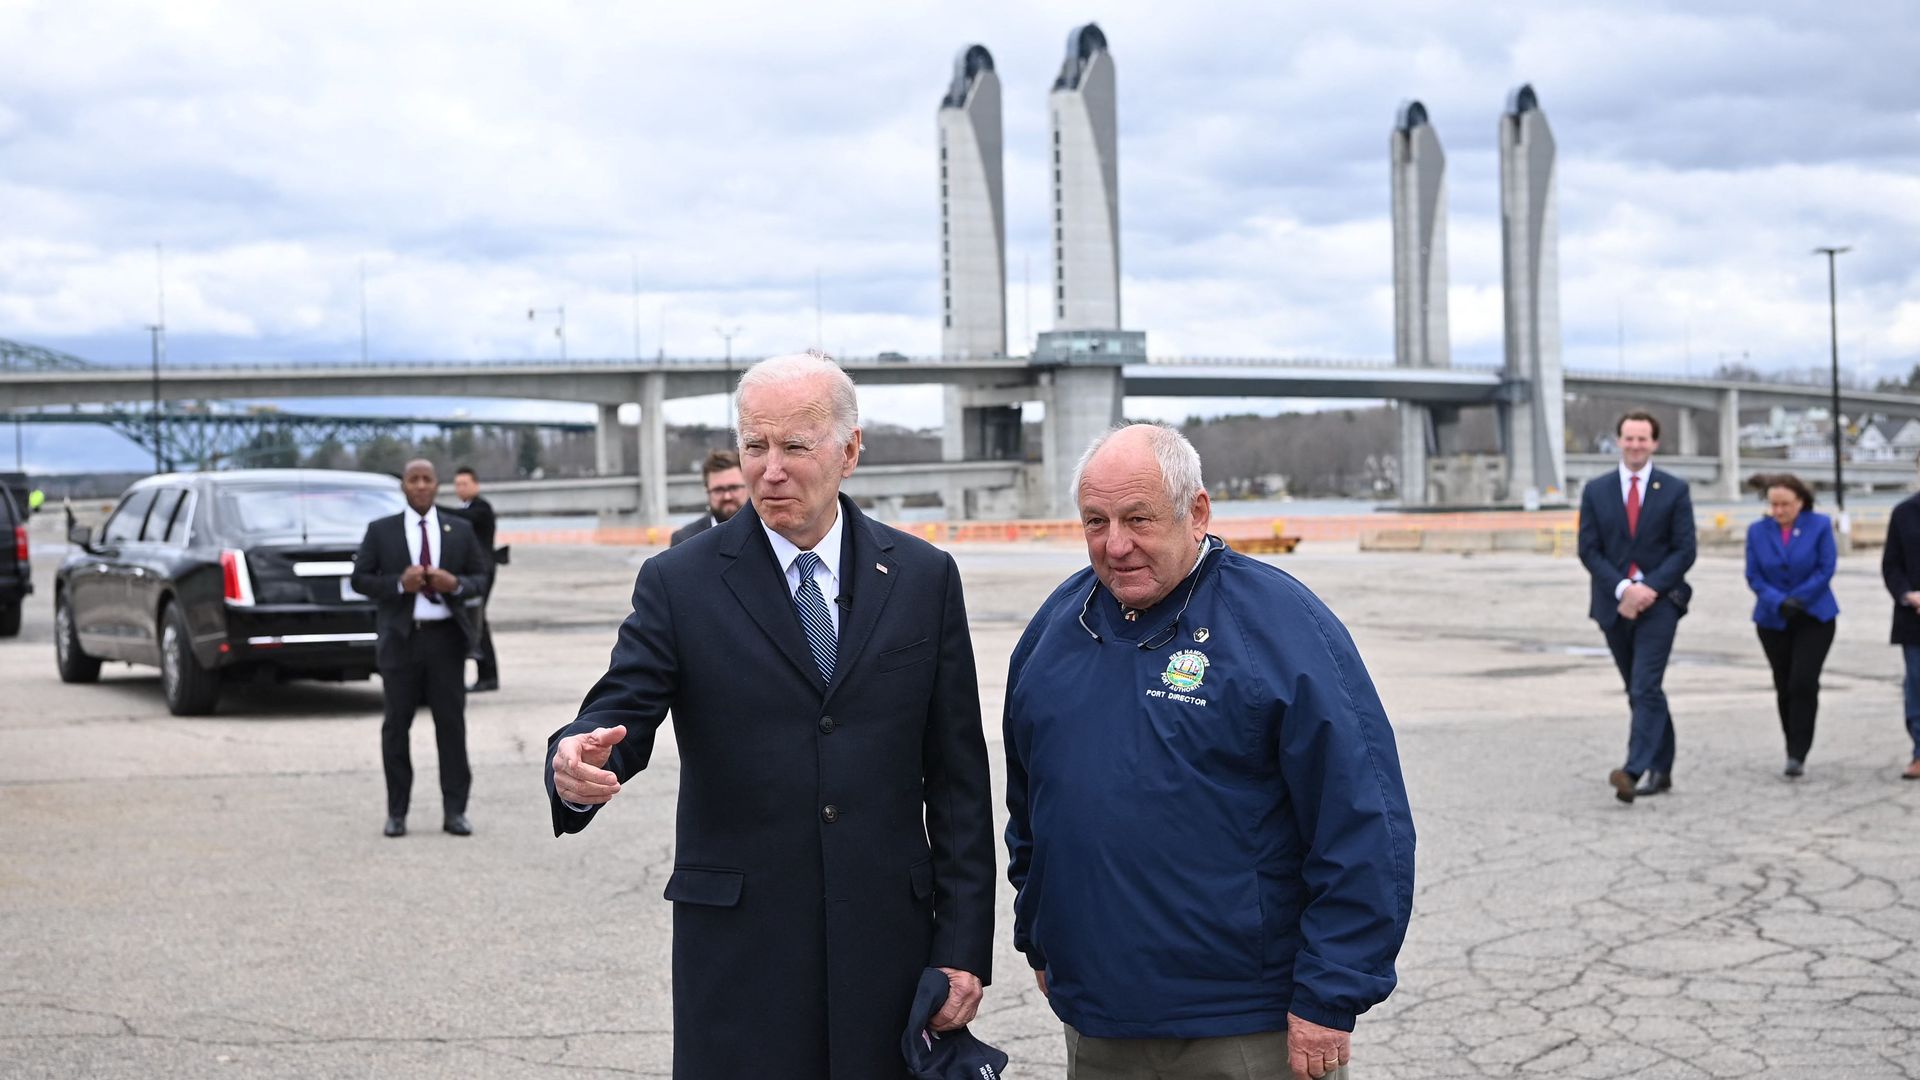 President Biden is seen addressing reporters amid a tour of the port in Portsmouth, N.H.